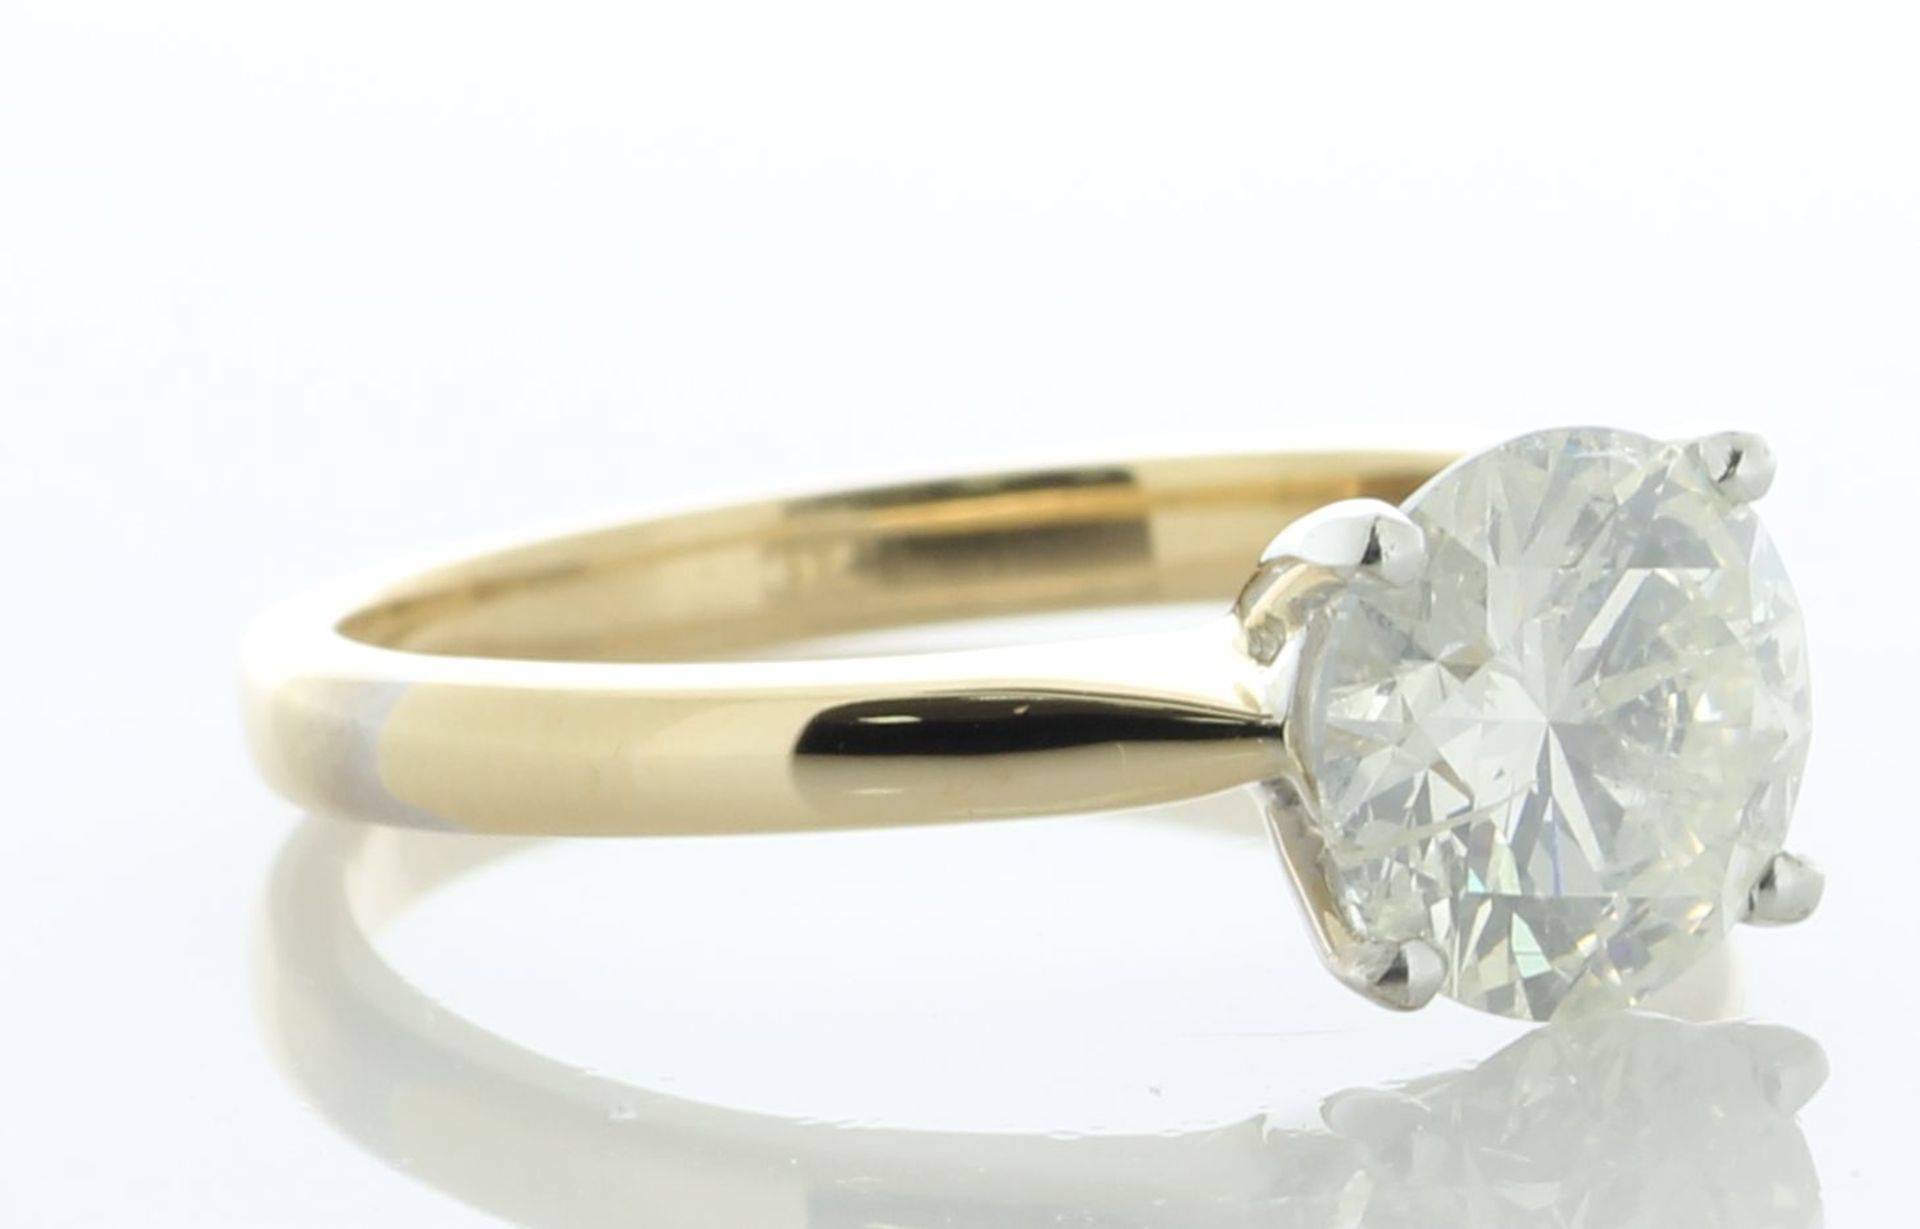 18ct Yellow Gold Single Stone Prong Set Diamond Ring 1.58 Carats - Valued By IDI £16,750.00 - A 1.58 - Image 2 of 5